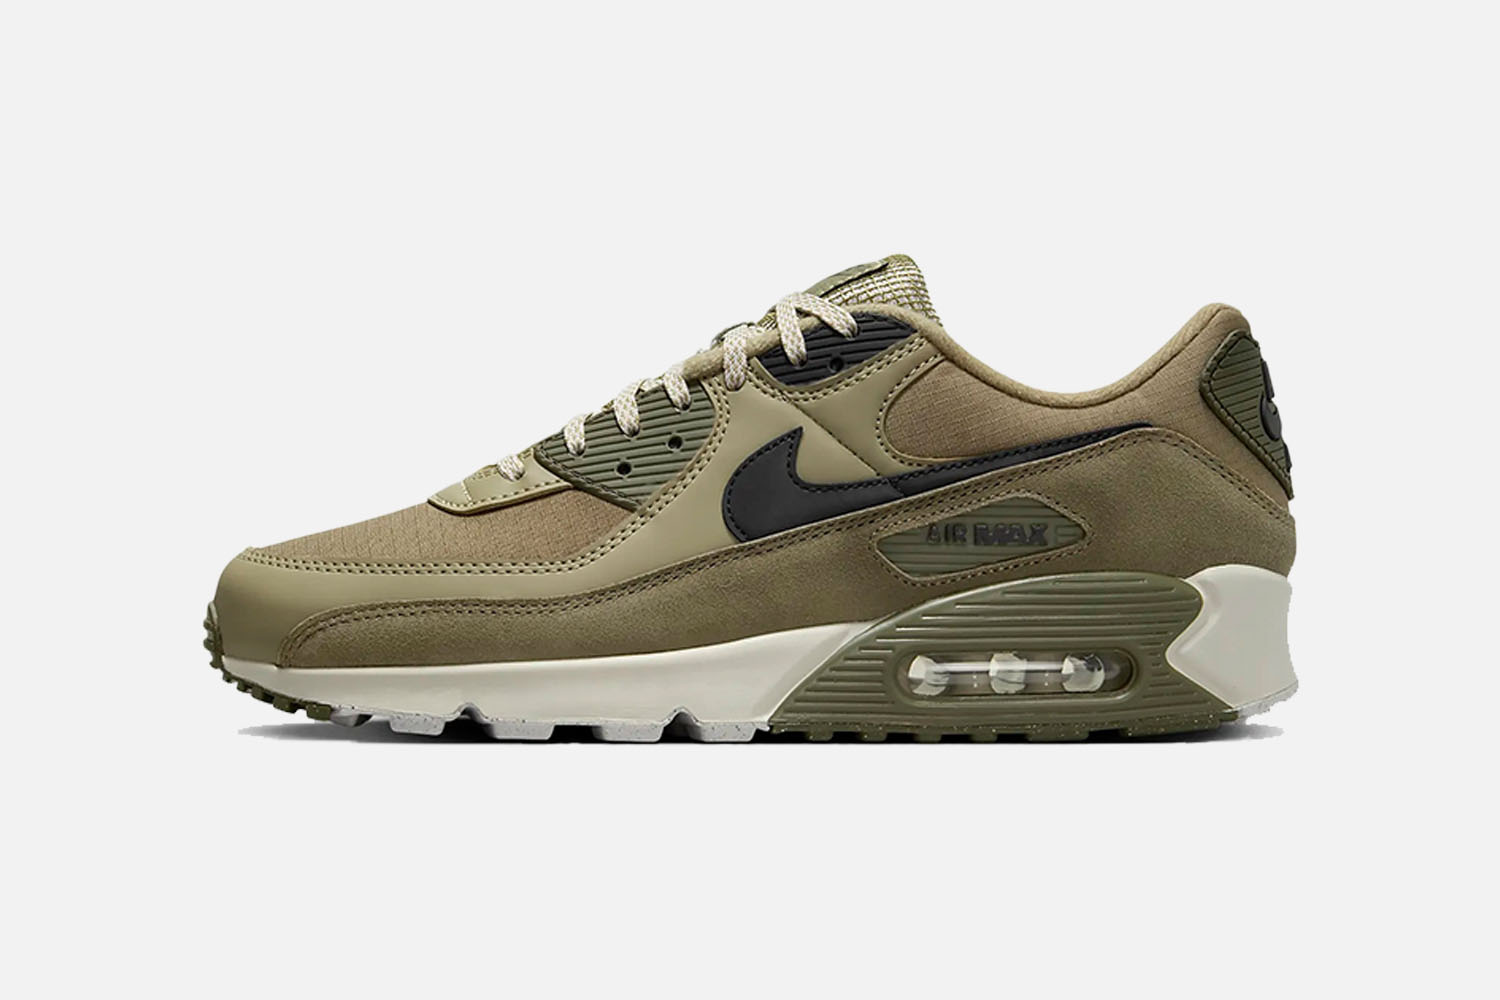 Nike Air Max 90  Latest Air Max 90 Trainer Releases